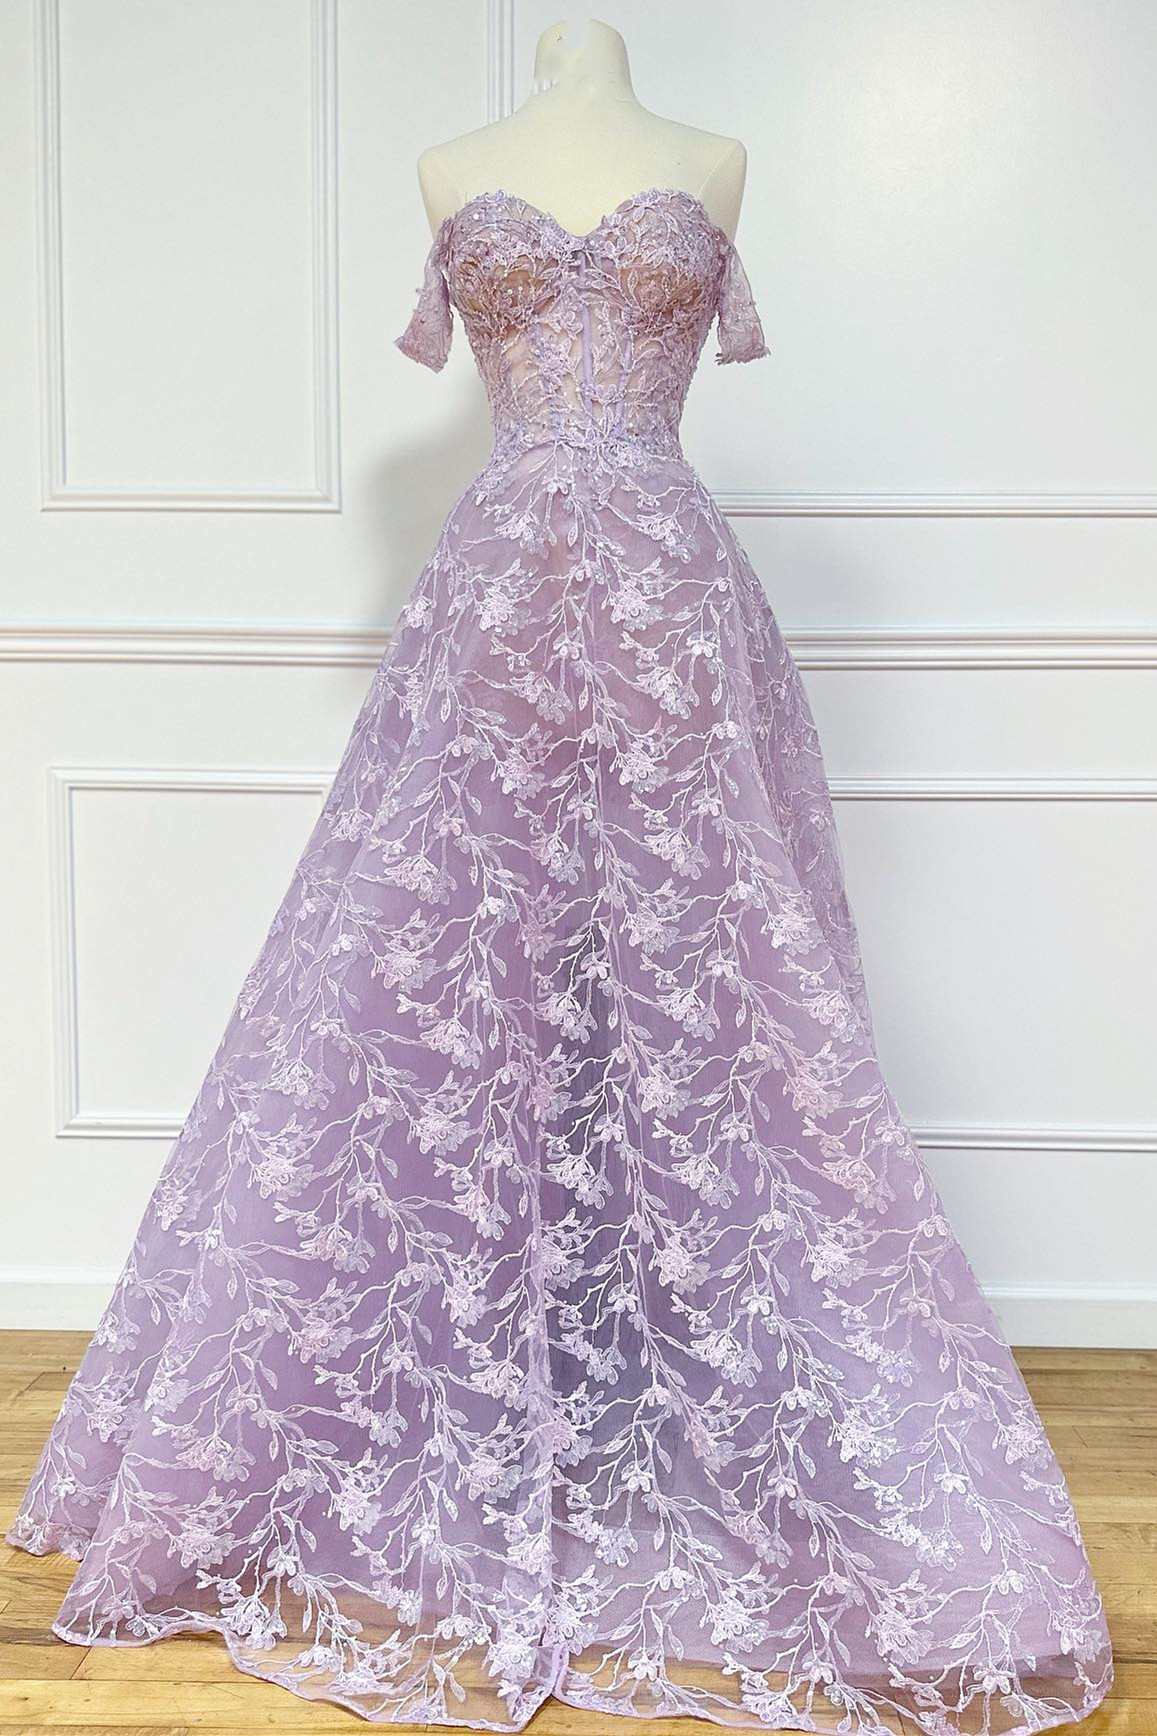 Lilac Tulle Floral Lace Off-the-Shoulder A-Line Prom Dress